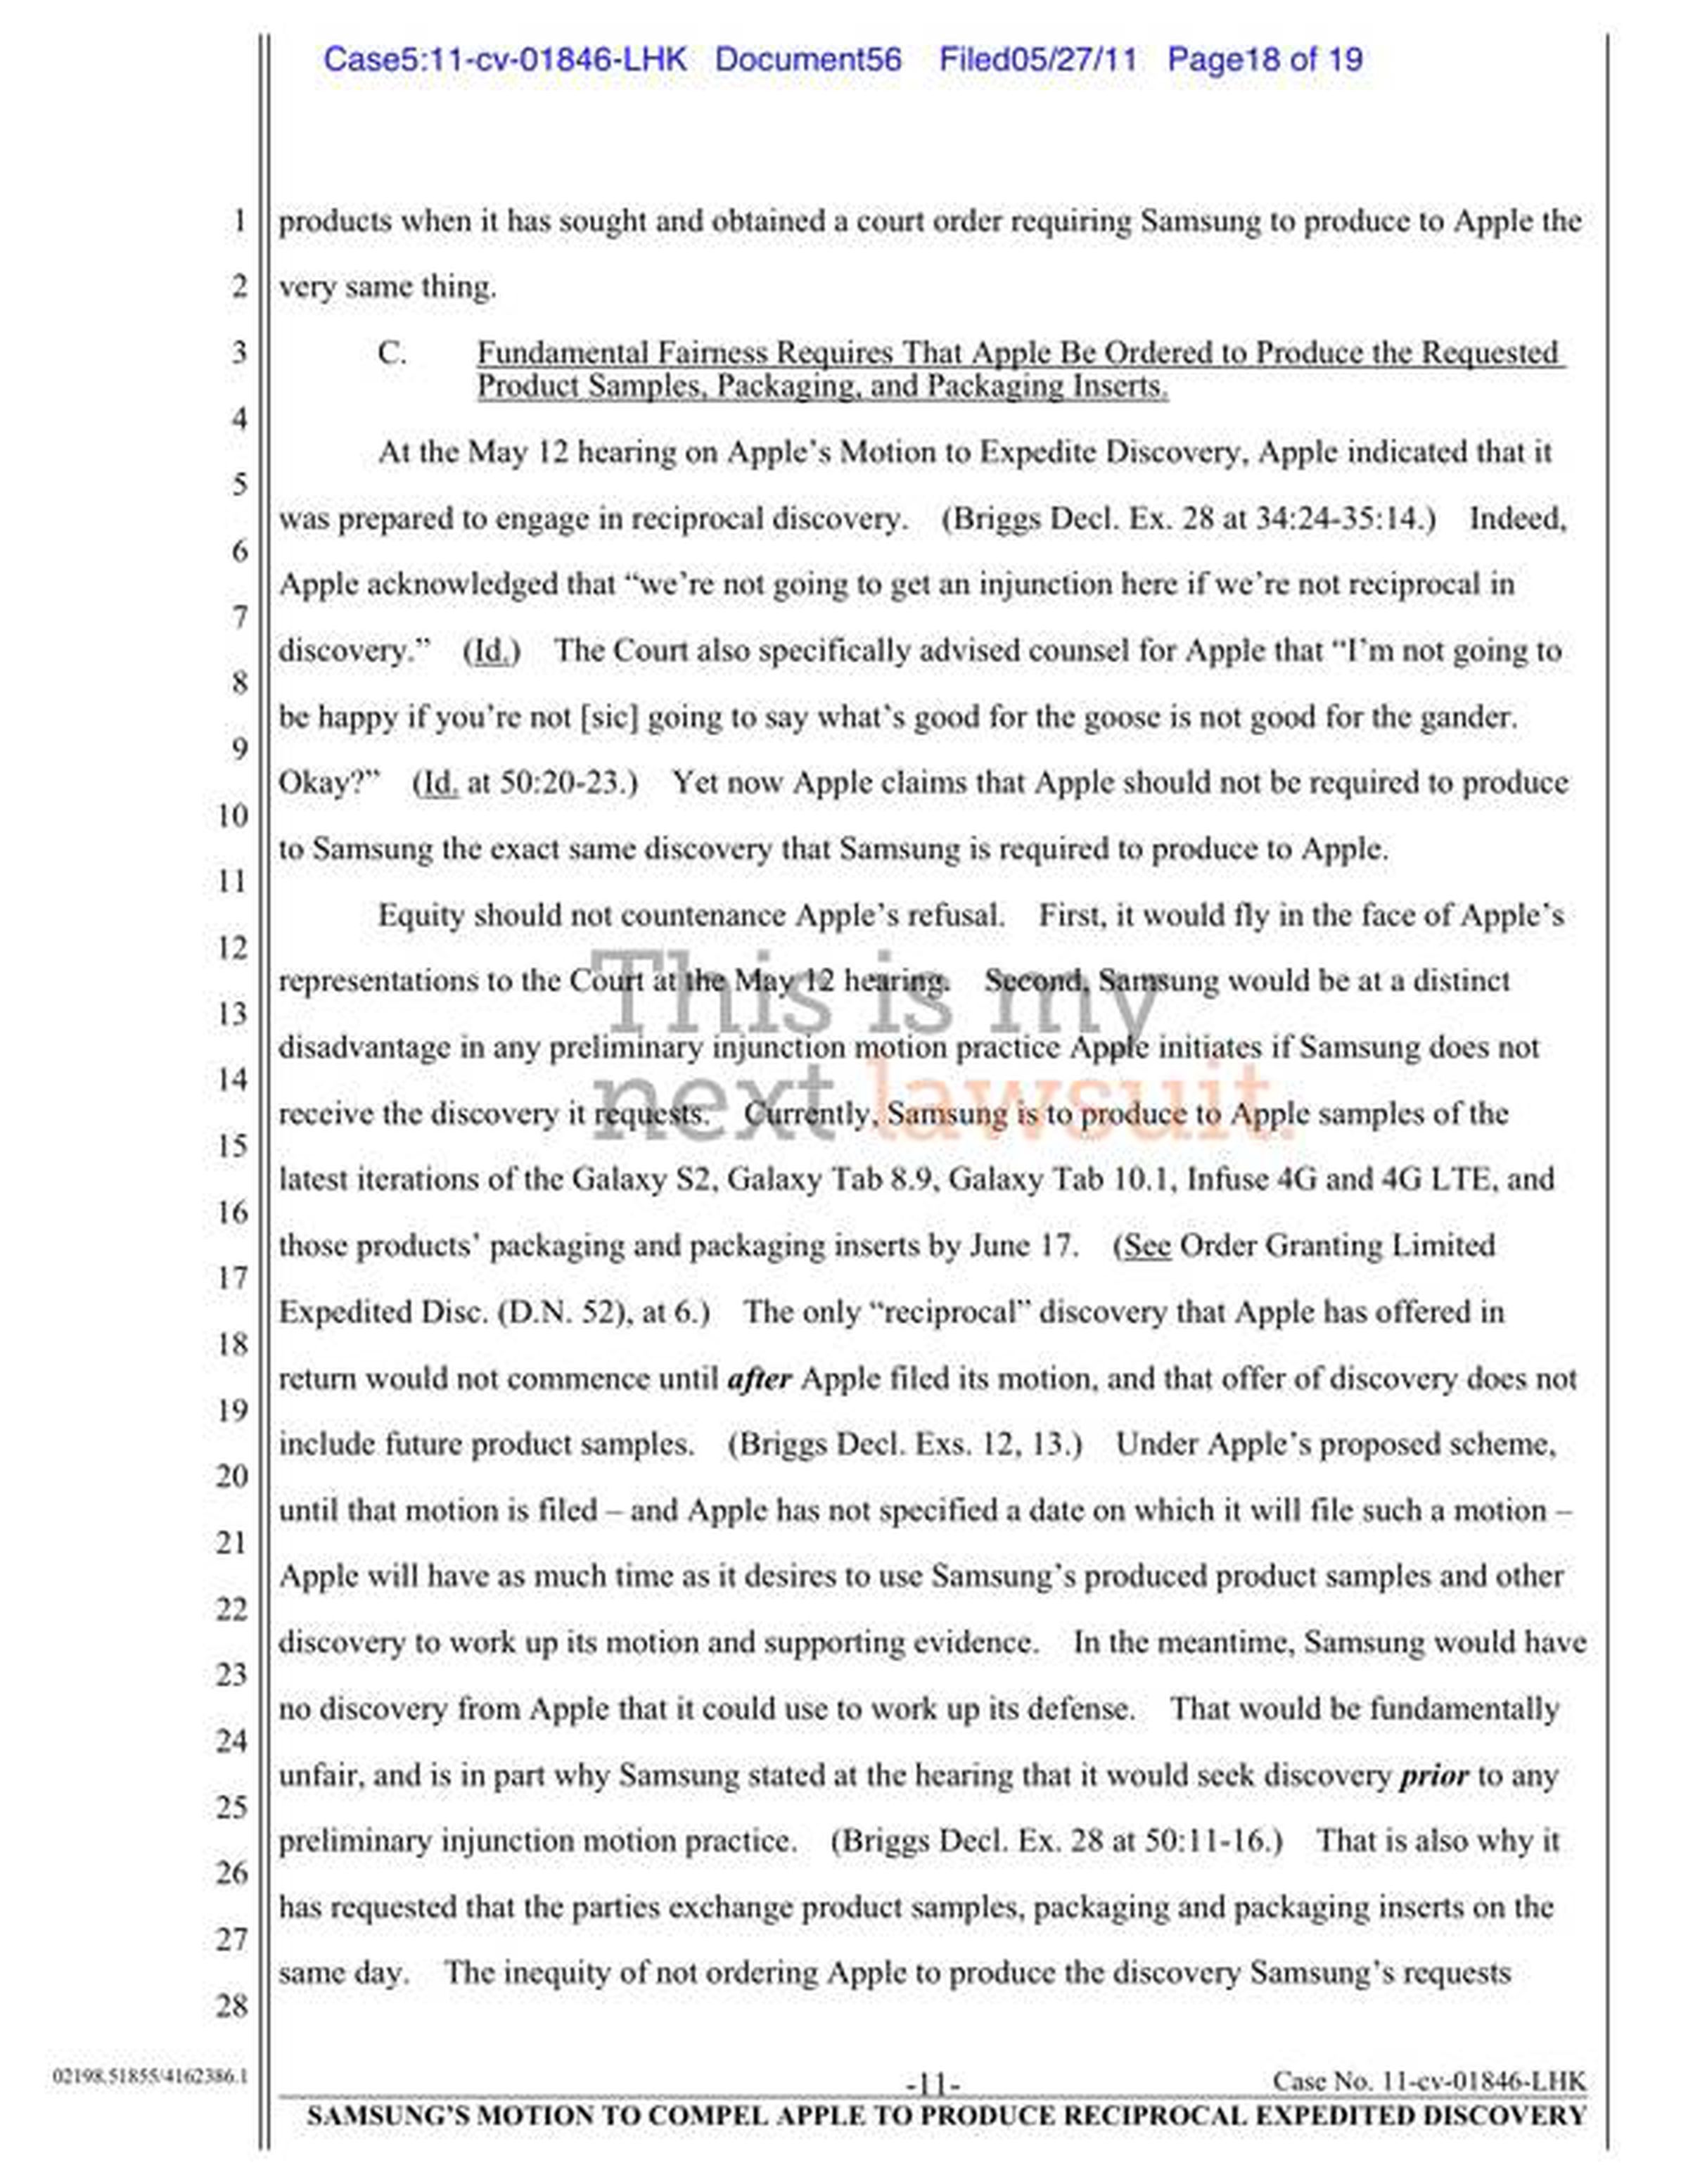 Samsung’s lawyers demand to see the iPhone 5 and iPad 3